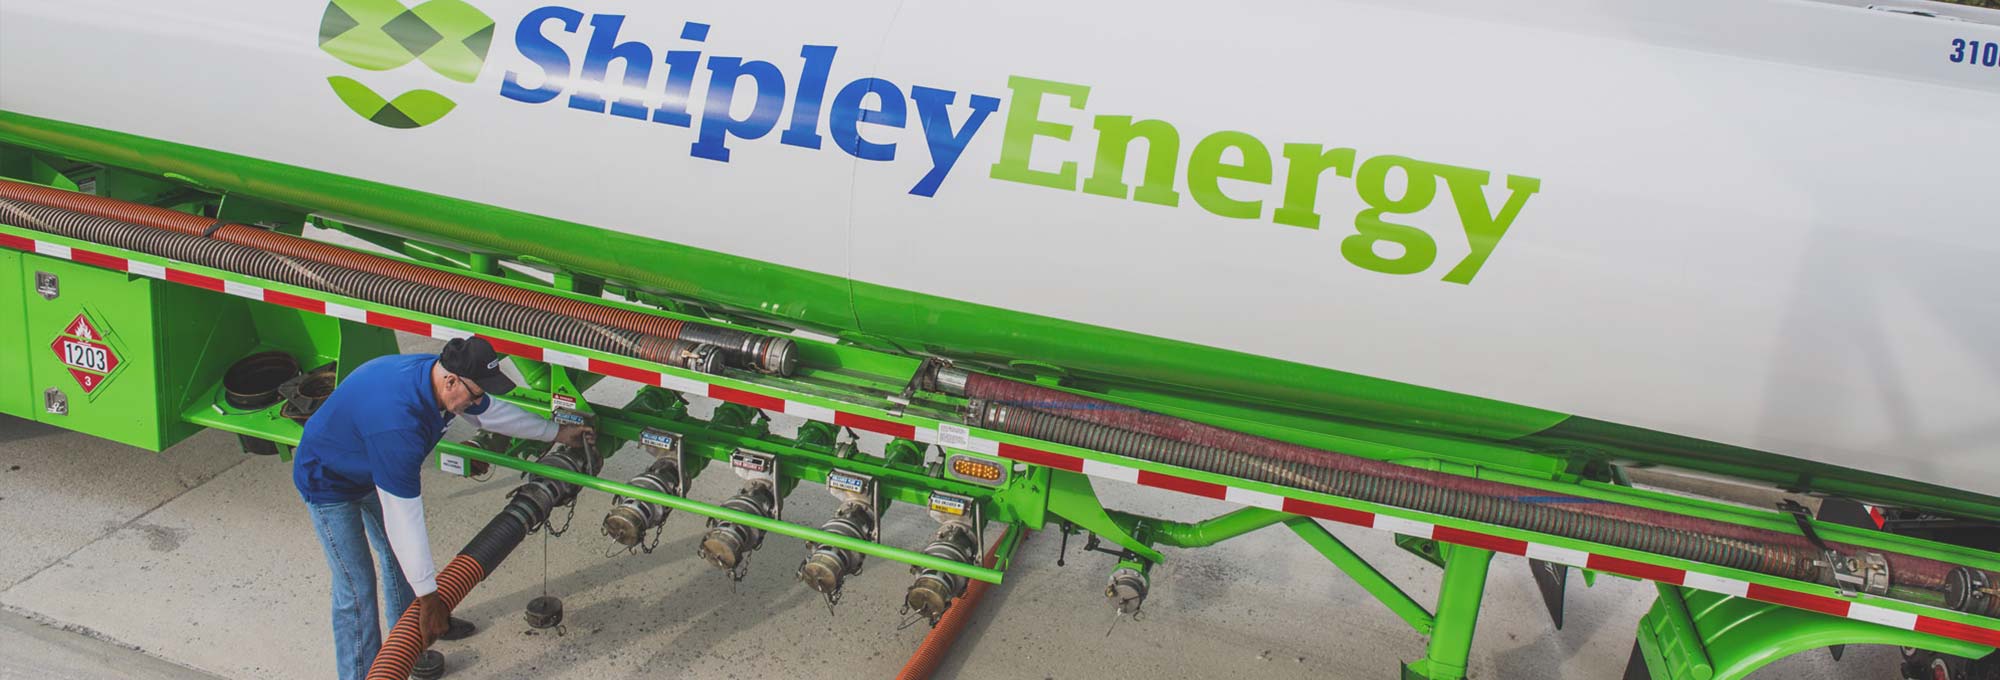 Turn Up the Heat With Shipley Energy